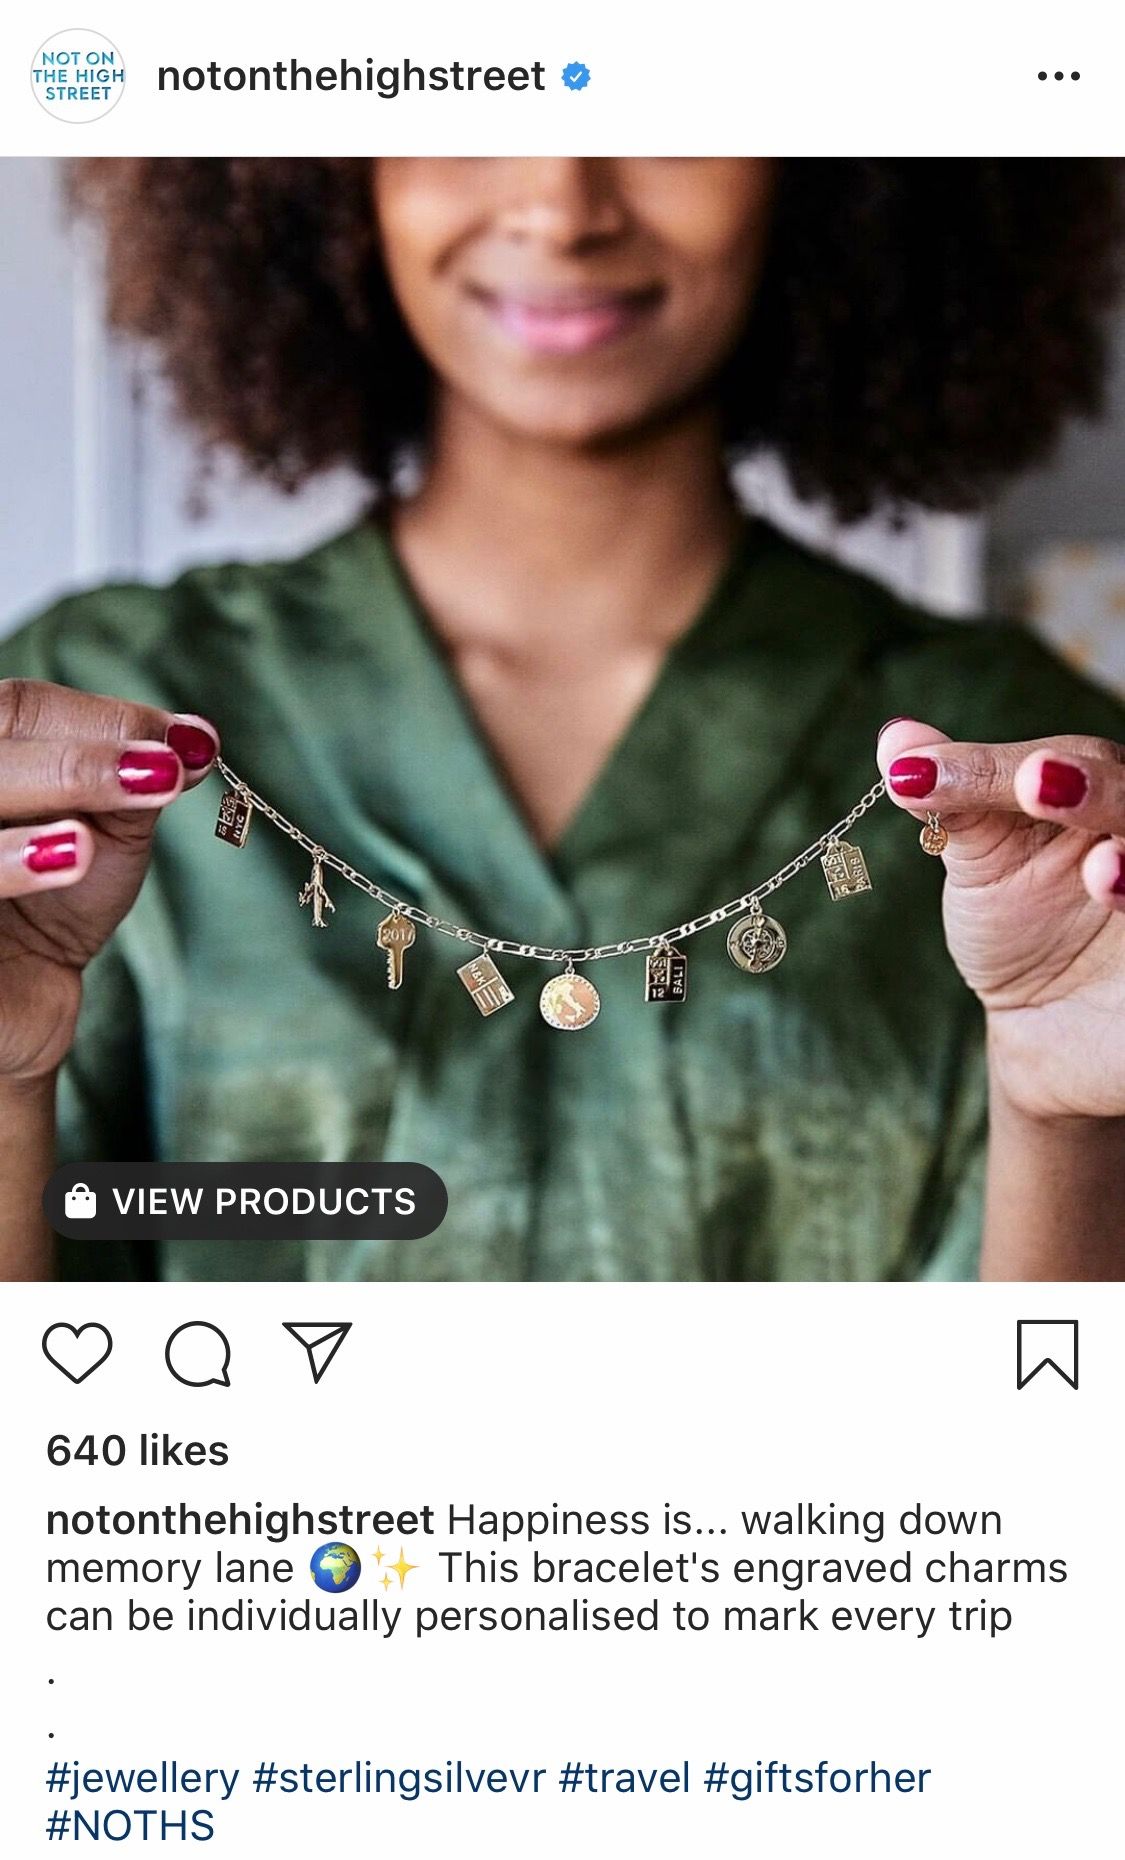 @notonthehighstreet Instagram post featuring ‘View Products’ option